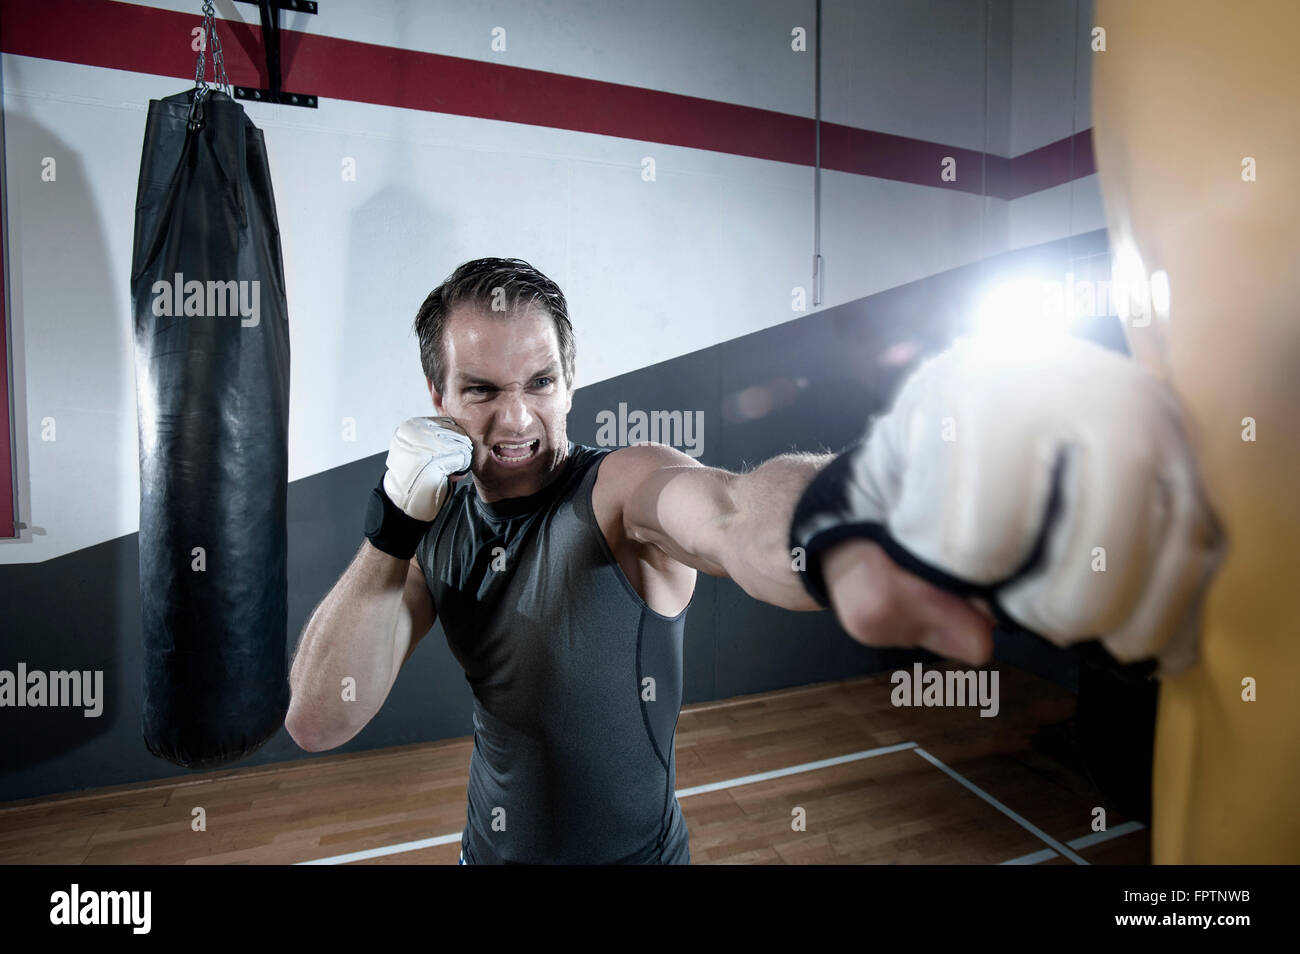 Sportsman doing strength training by punching on punch bag in the gym, Bavaria, Germany Stock Photo